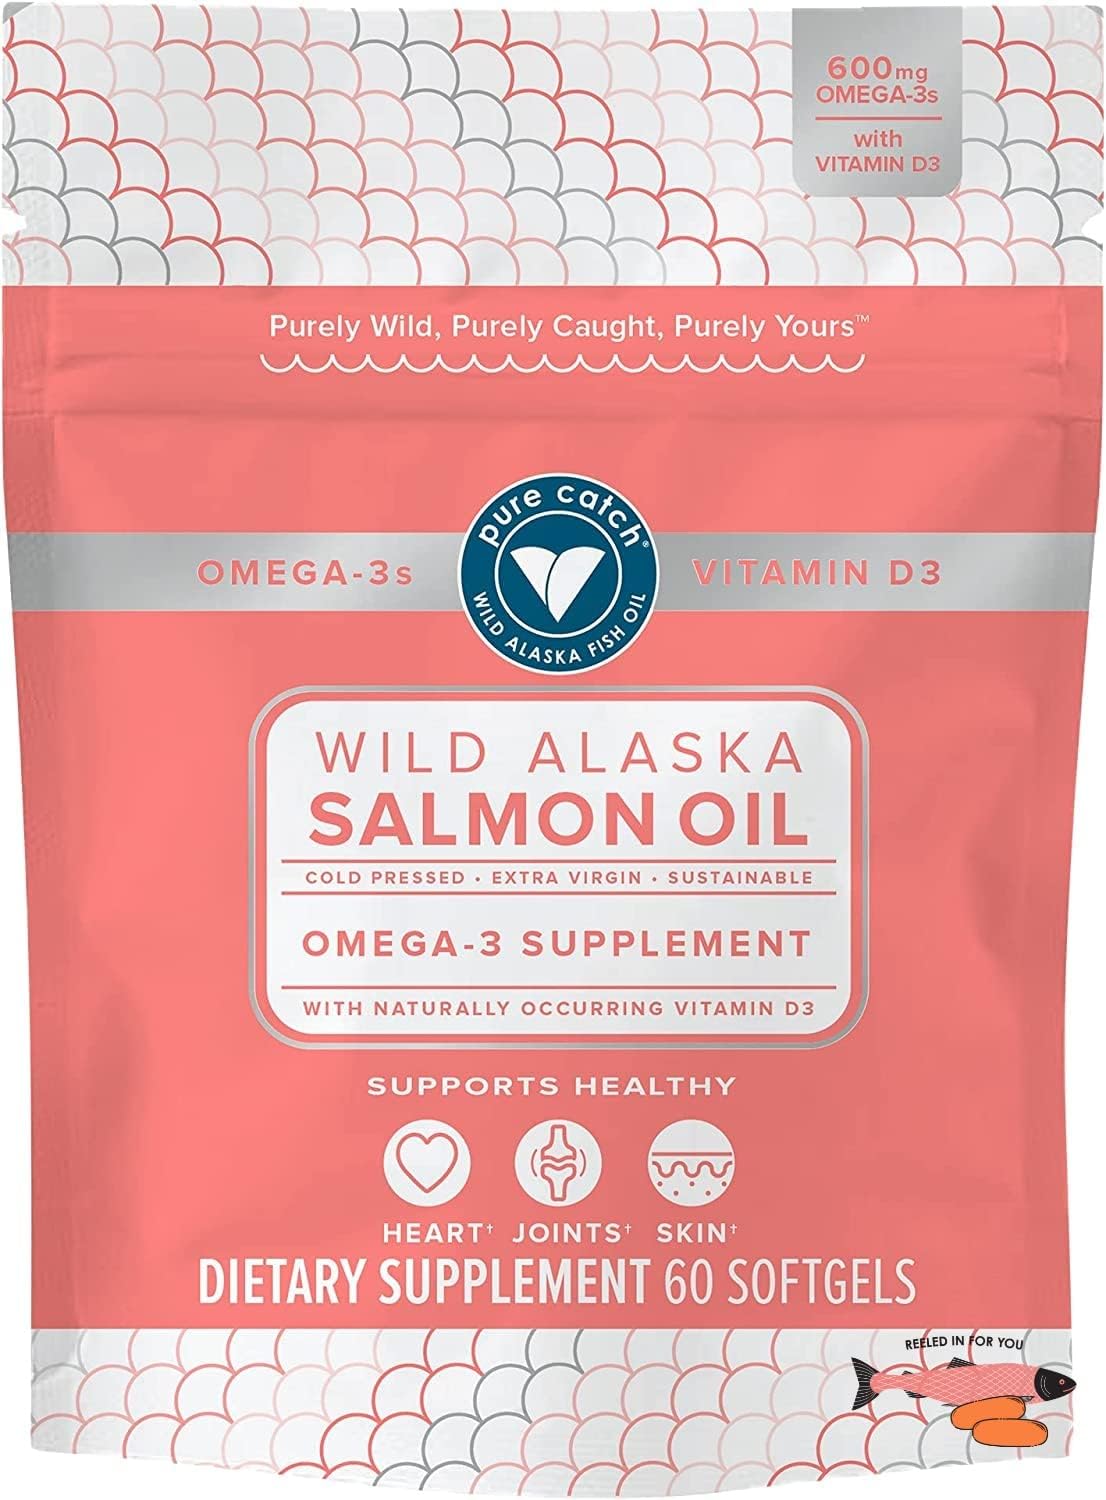 Trident Pure Catch Wild Alaska Salmon Oil Supplement - (60 Count Soft Gels) - Contains Vitamin D3, EPA & DHA Omega-3 Fatty Acids, Supports a Healthy Heart, Joints and Skin, Refreshing Citrus